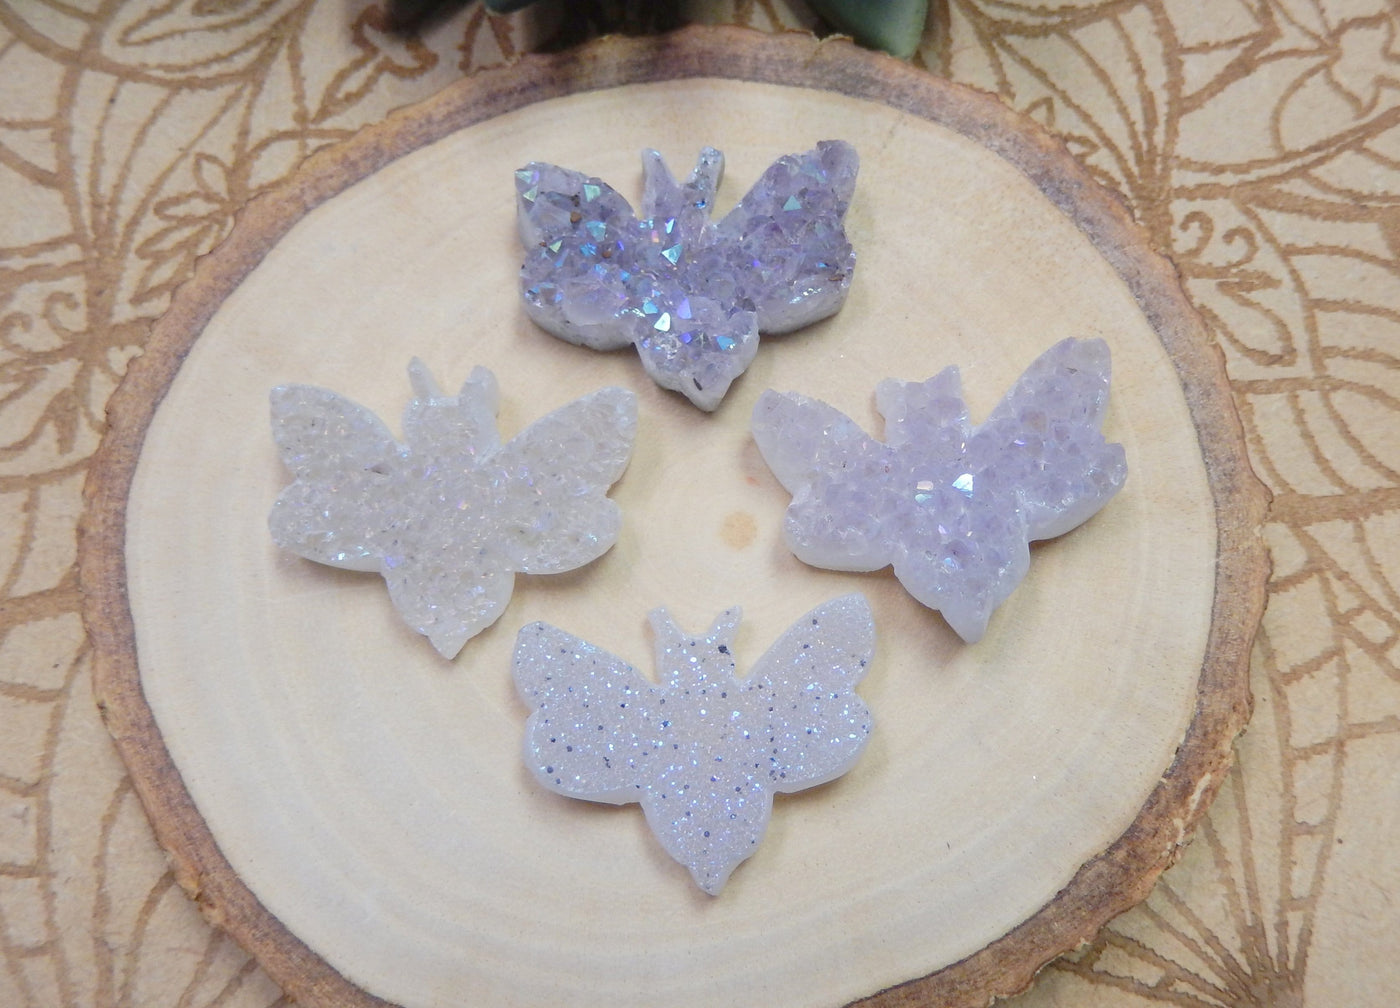 4 Titanium Cabochon Druzy Bumblebee Undrilled Pendants shown together to show variation of product